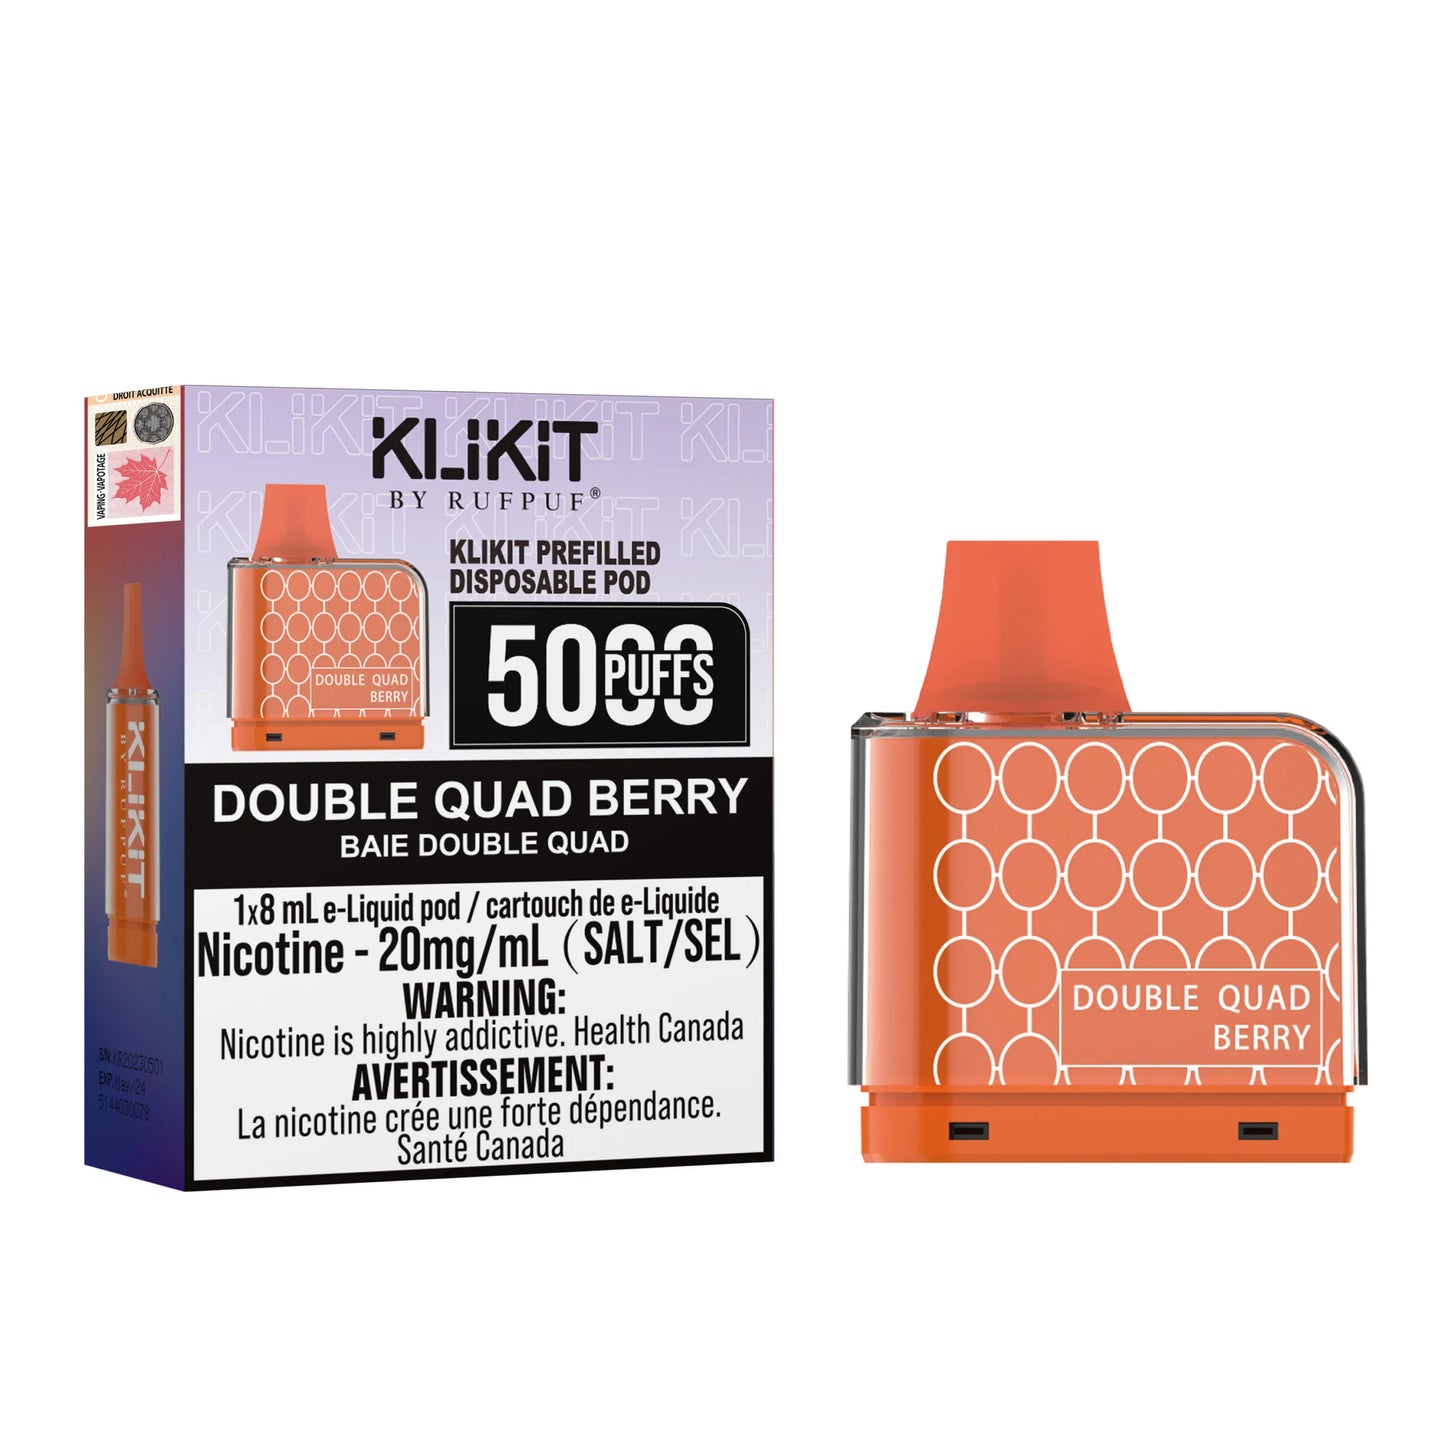 RUFPUF Klikit replacement Pods - 5000